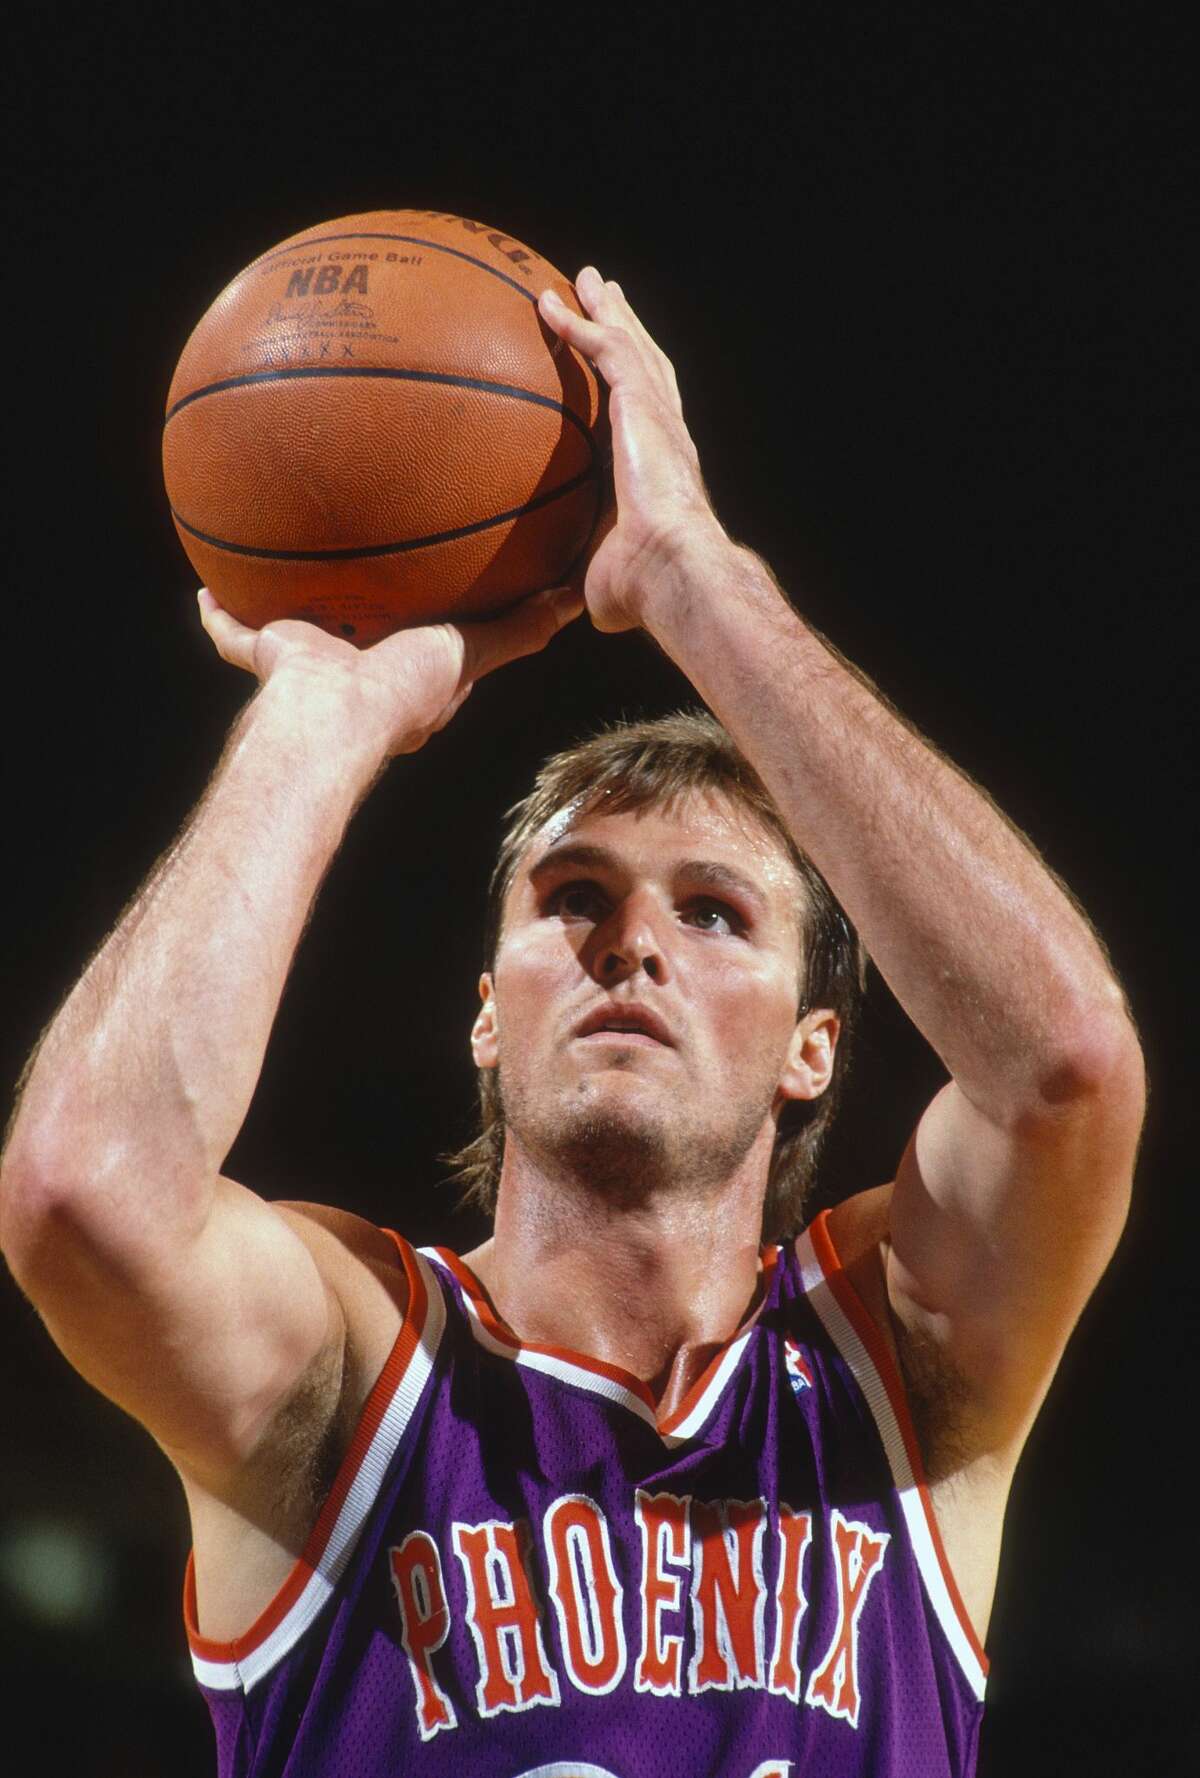 1988: Tom Chambers to Phoenix The former all-star with the Sonics took his talents to the desert and shined in Phoenix, helping the team shock the Lakers in the 1990 playoffs en route to the conference final. In 1993, Chambers played a reserve role on the Charles Barkley-led Suns squad that lost to the Bulls in the Finals.